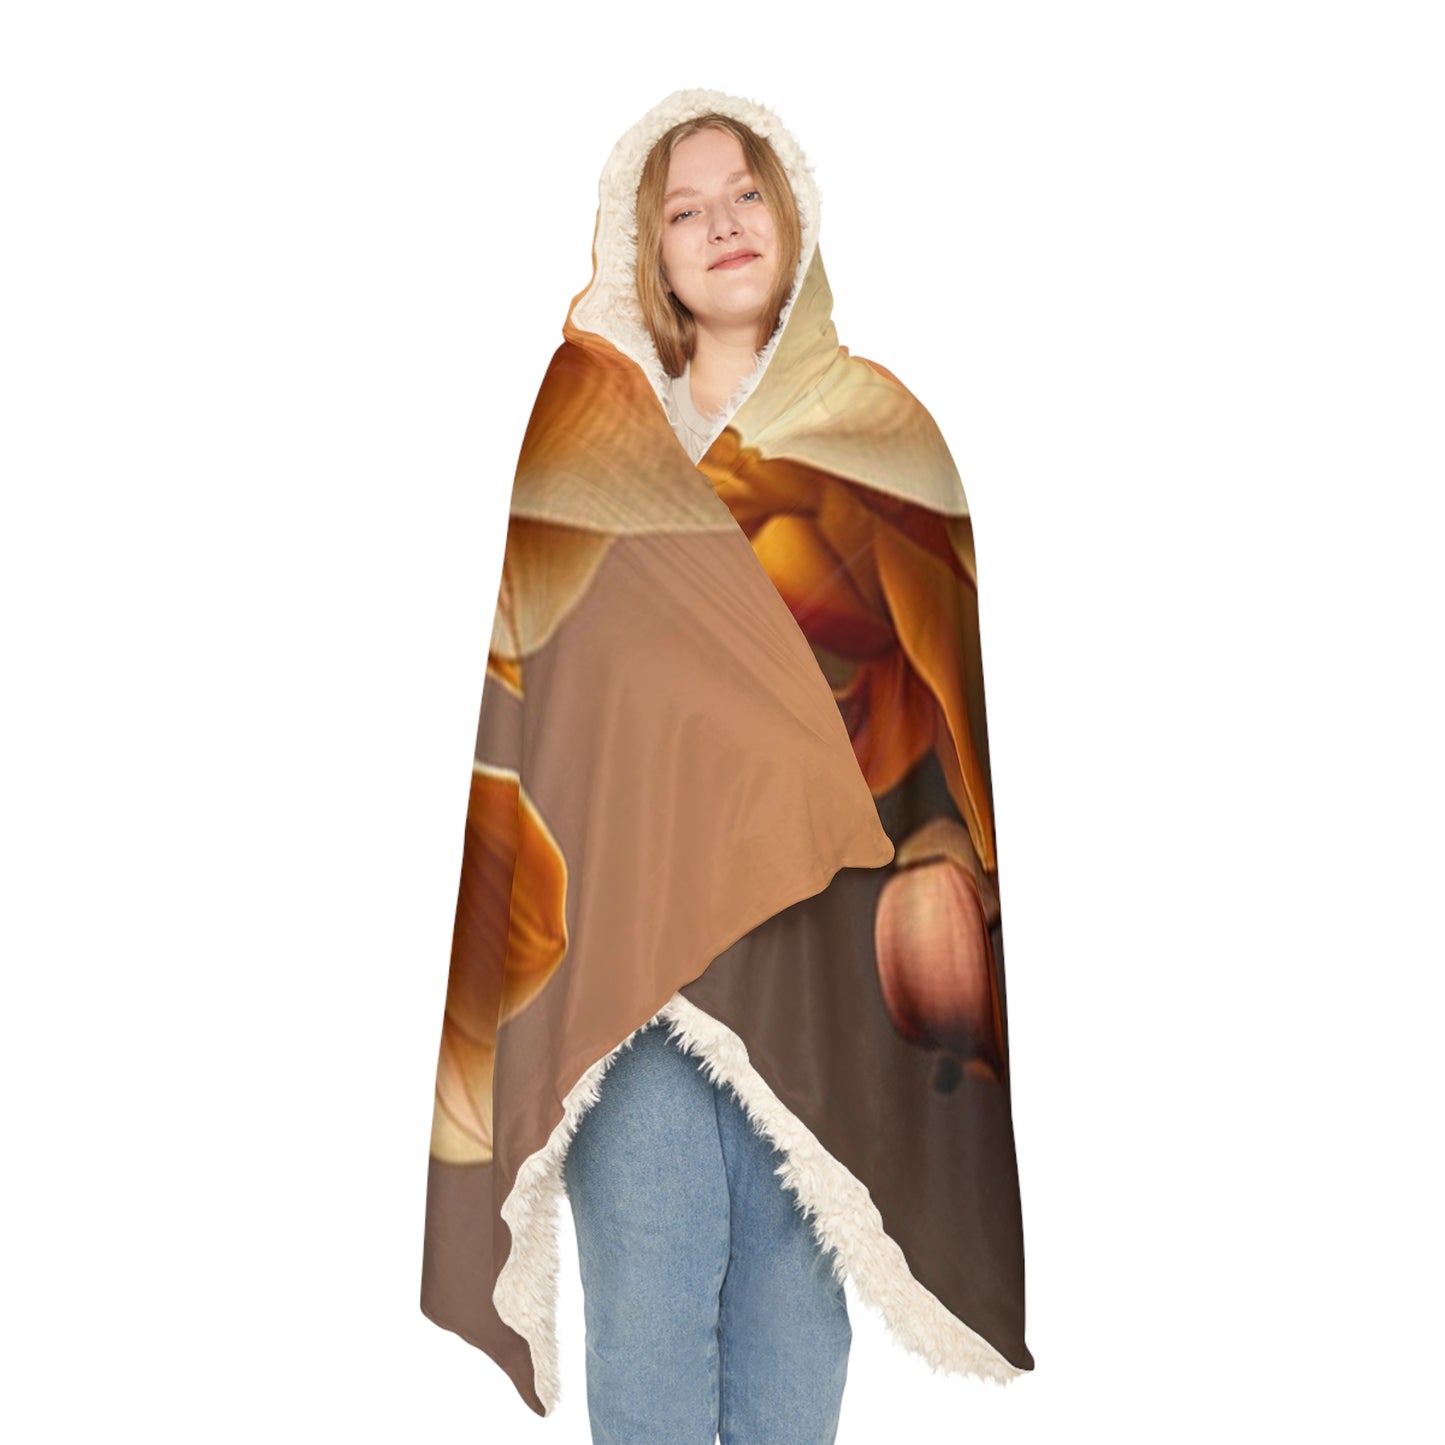 Snuggle Hooded Blanket orchid pedals 2